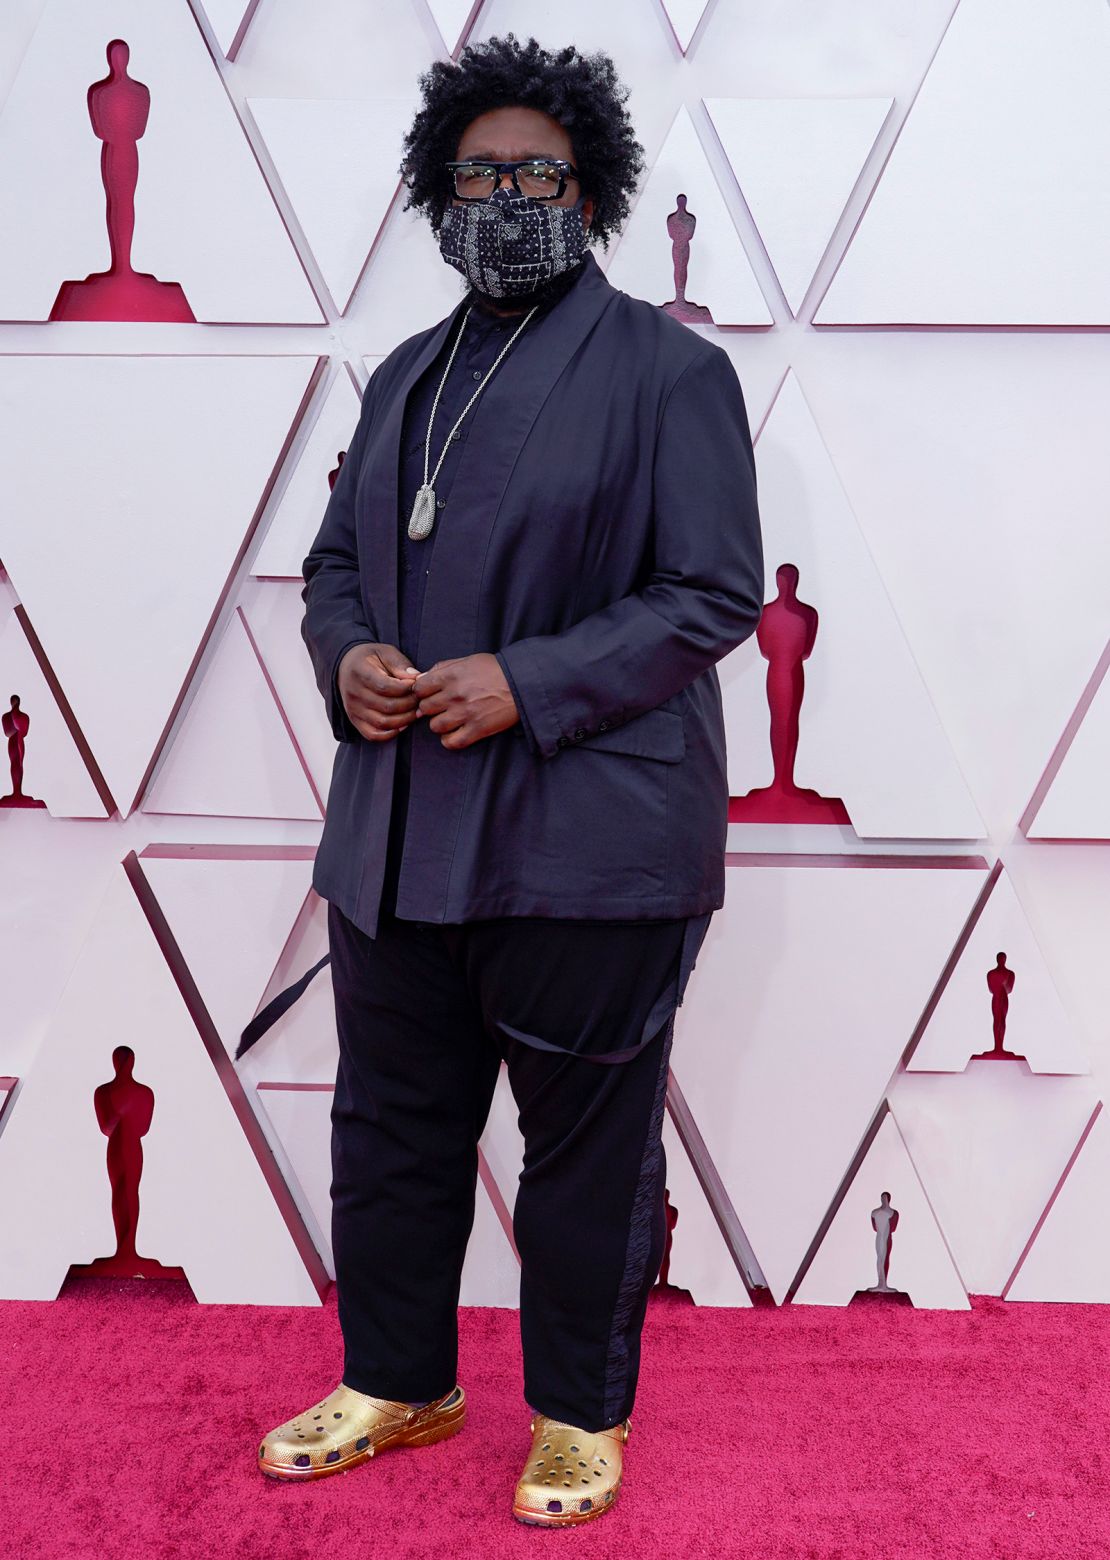 Questlove wore Crocs to the 2021 Oscars.